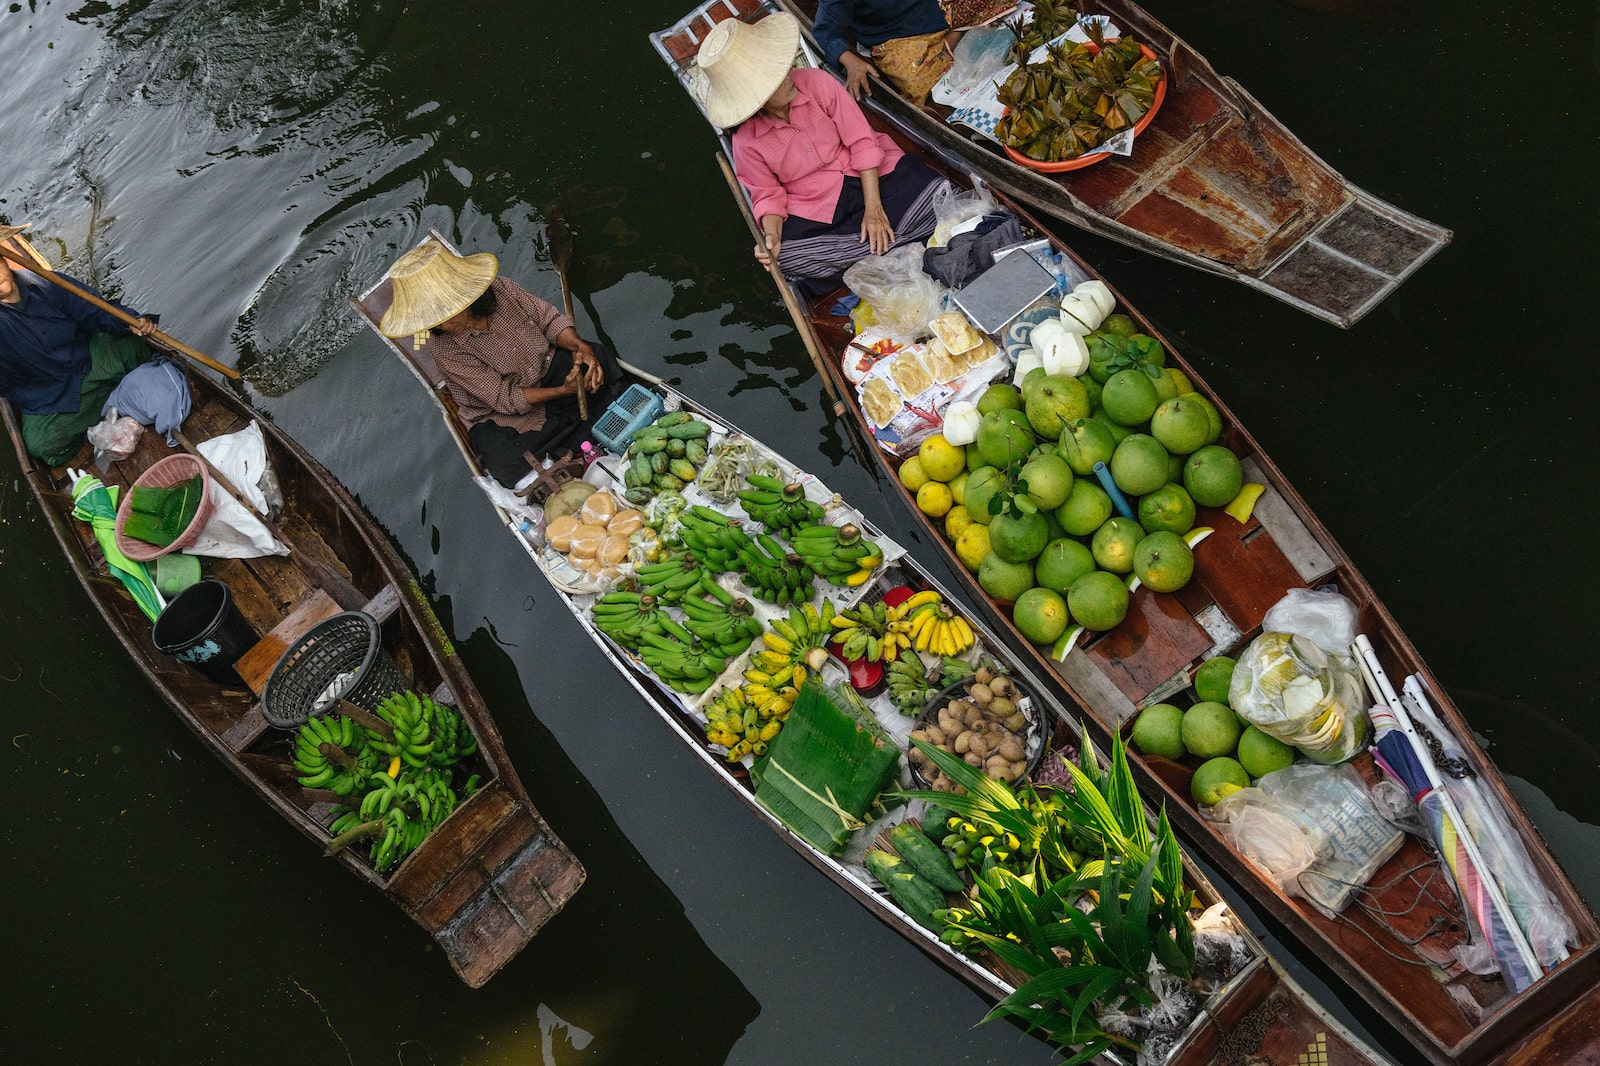 Merchants on sampans loaded with fruits